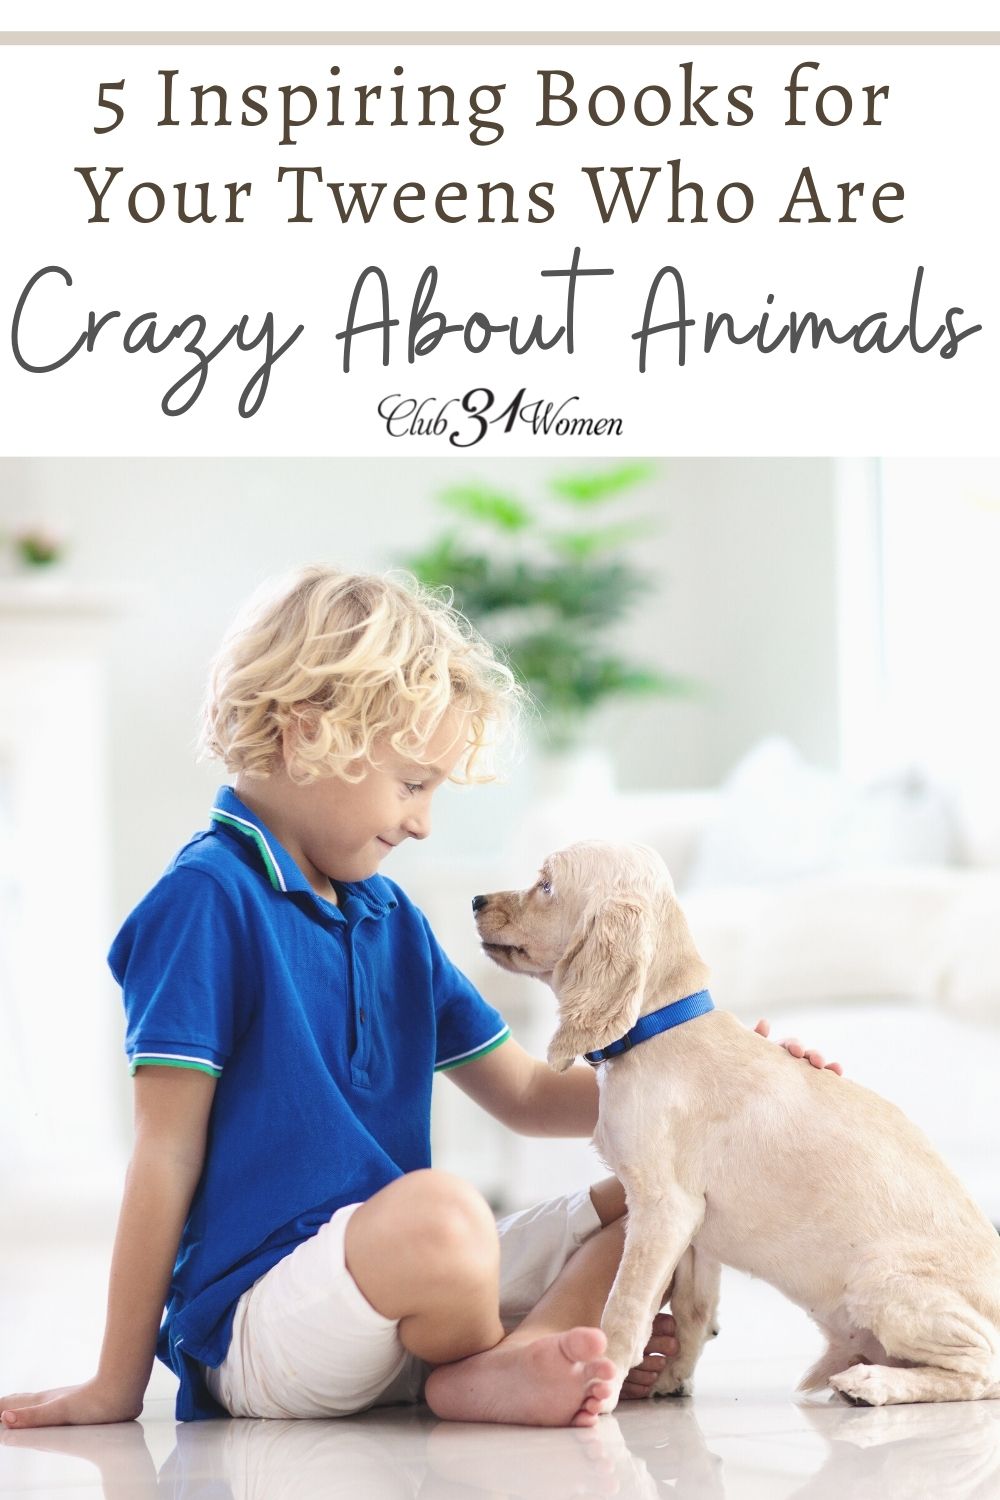 Animal stories are some of the most interesting and imaginative reads! With all the titles out there, here is a narrow list to get your tween started! via @Club31Women